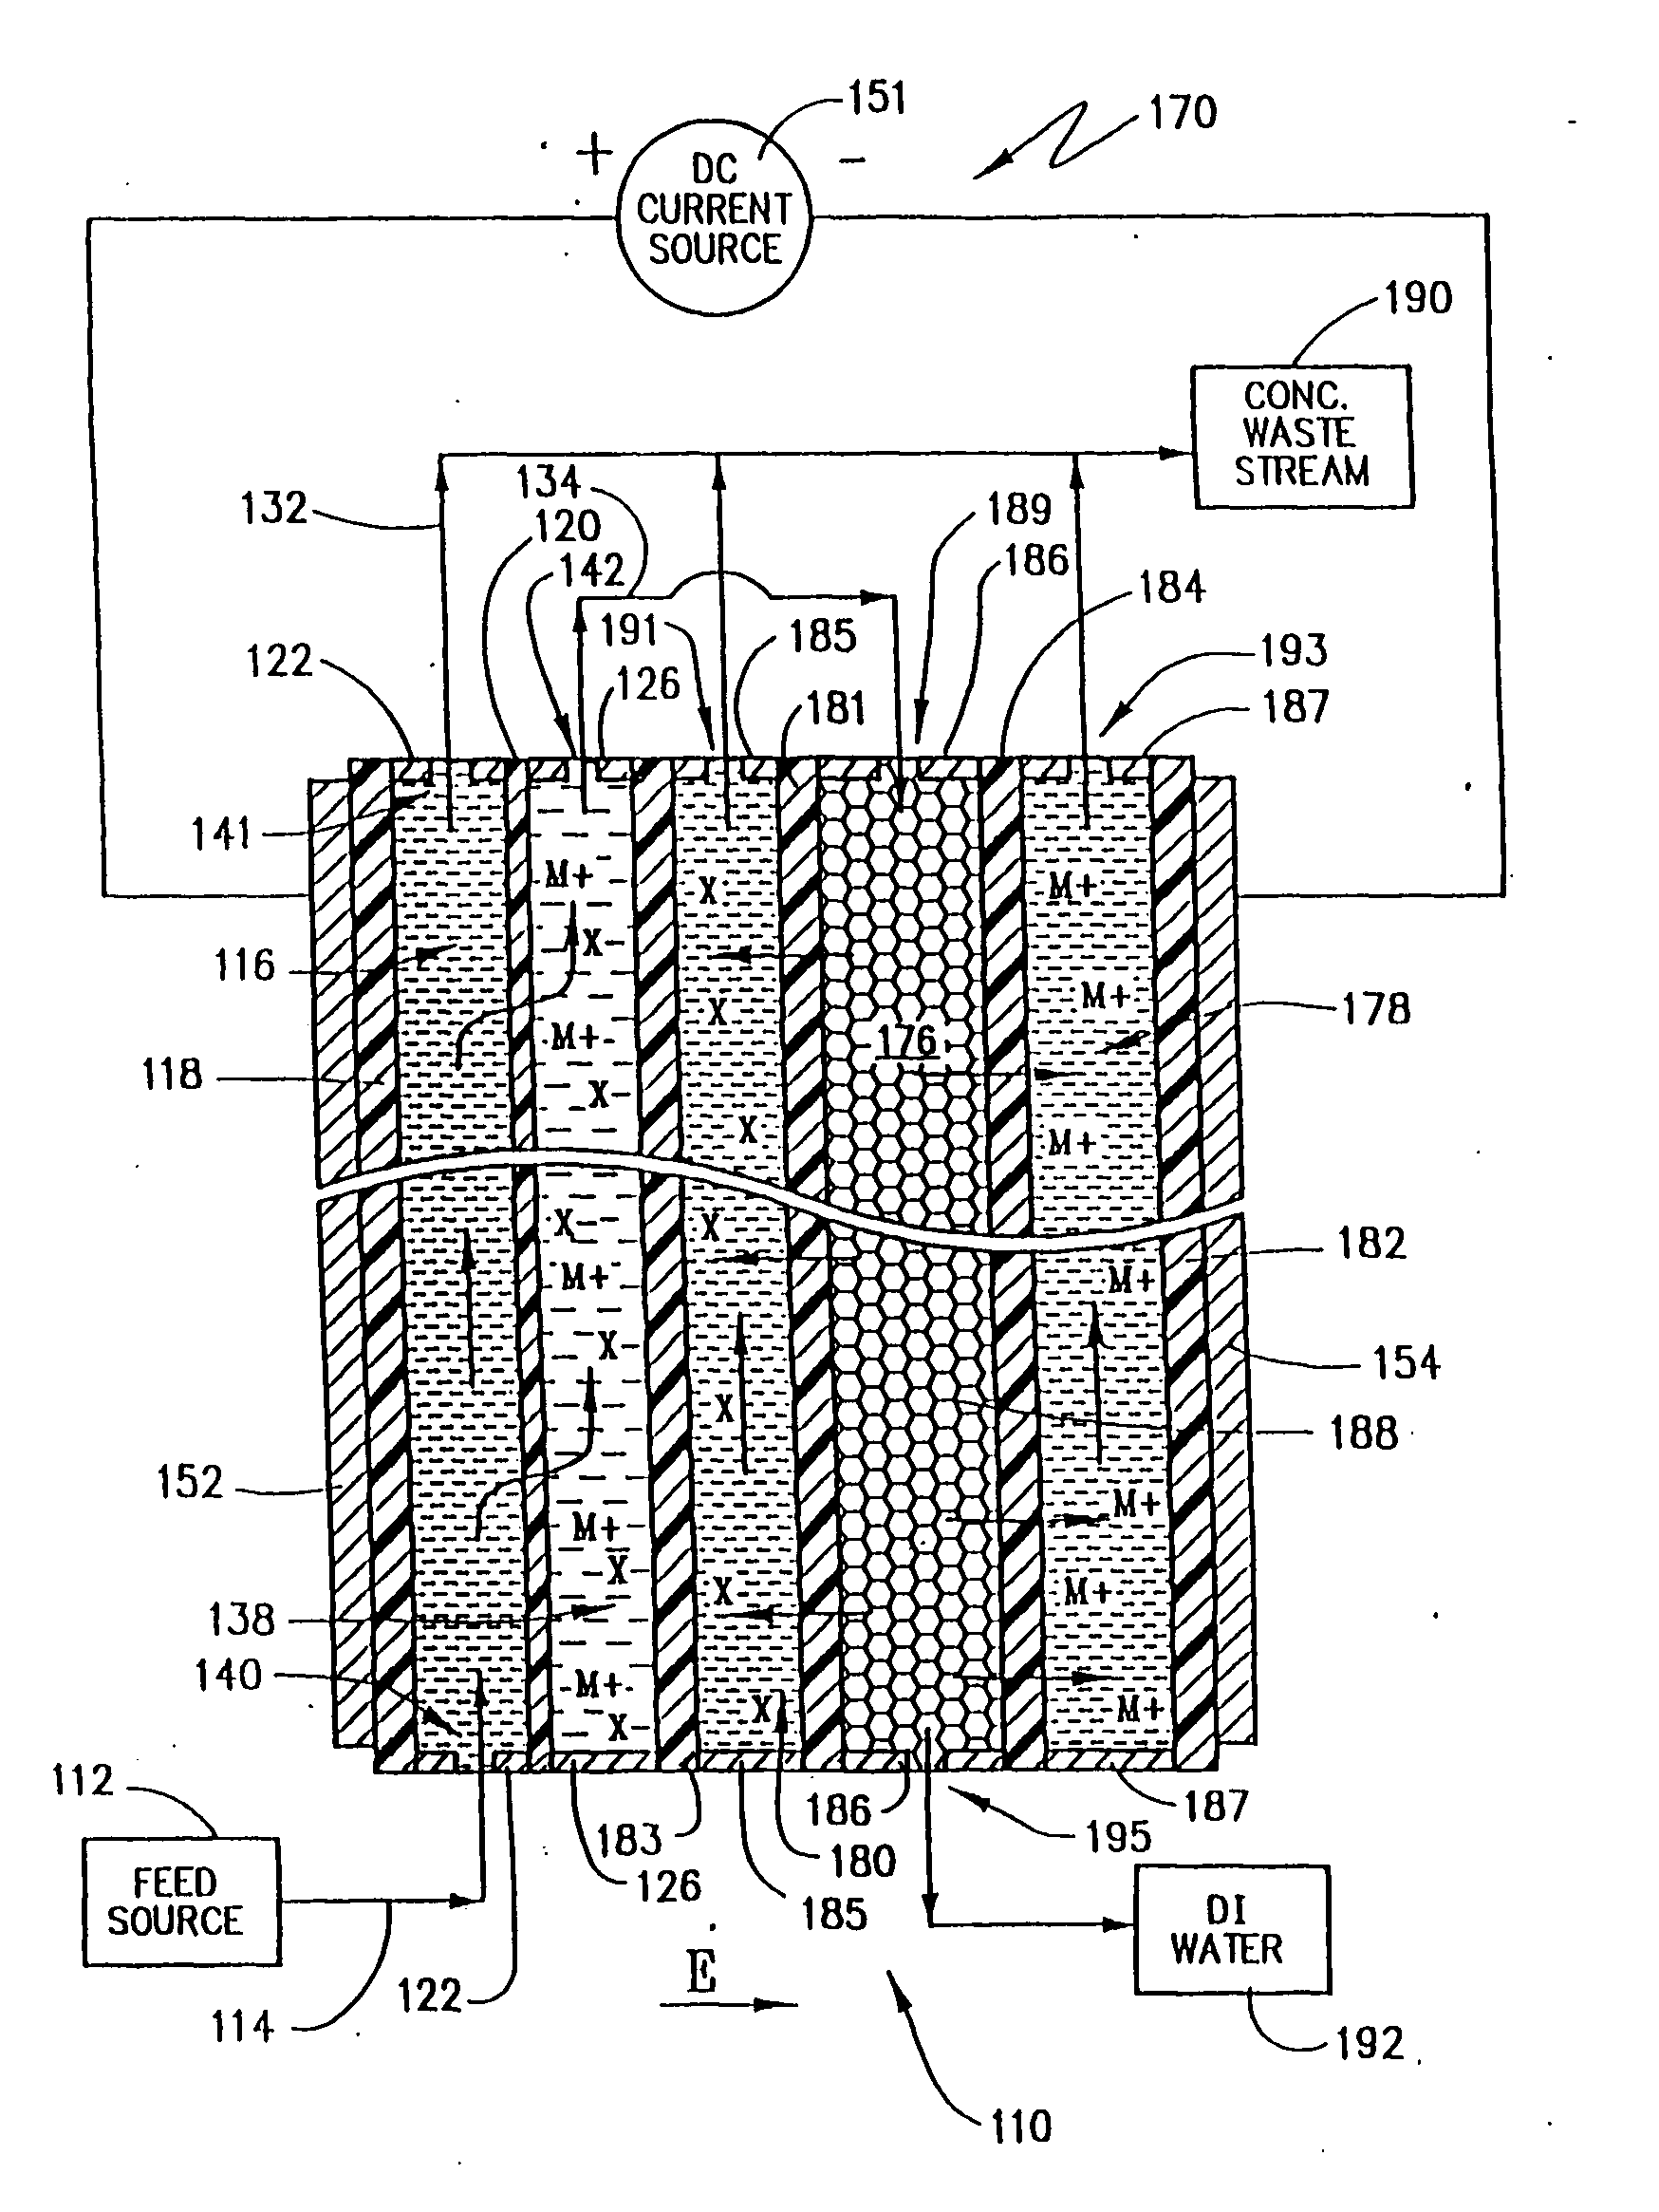 Electrophoretic cross-flow filtration and electrodeionization method for treating effluent waste and apparatus for use therewith